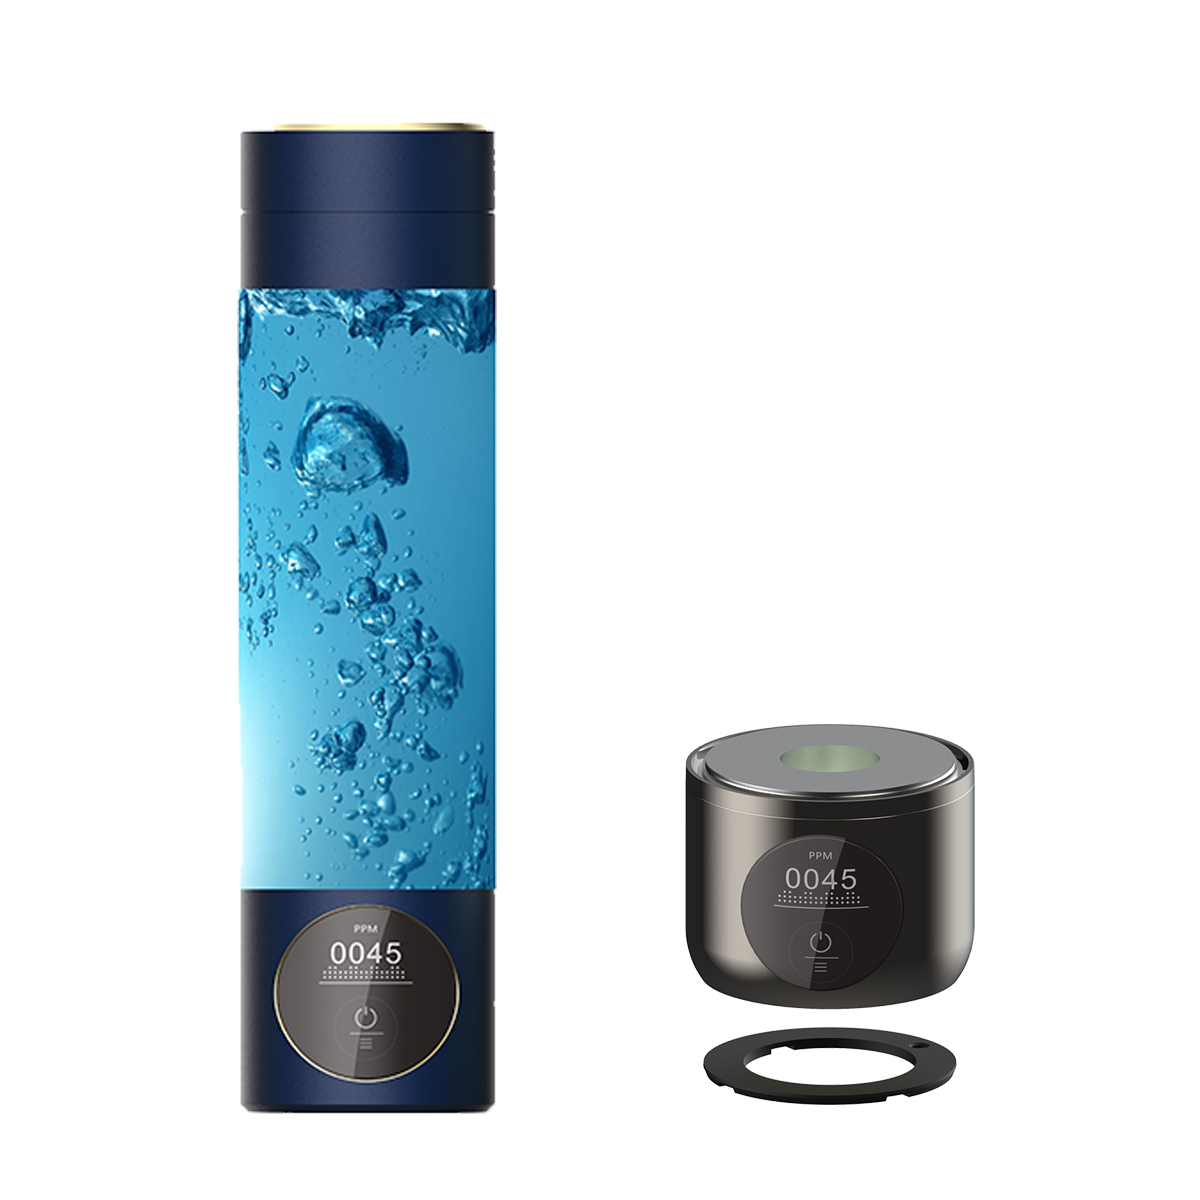 260ml portable Usb rechargeable hydrogen enriched water cup, suitable for both home and outdoor, contact me to know more.